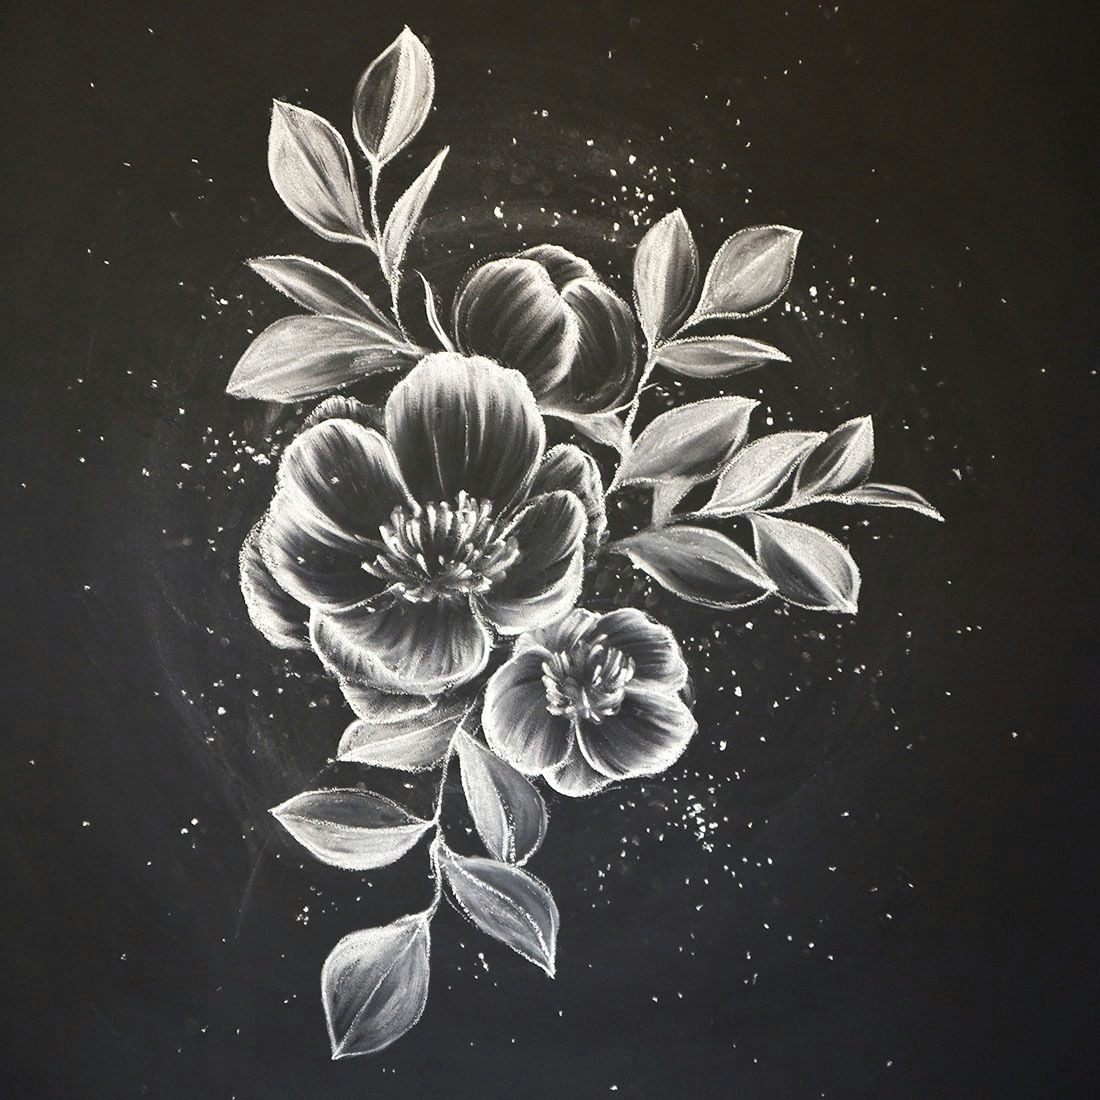 Drawing Flowers On Chalkboard Time to Learn Chalk Art From An Insta Famous social Celeb